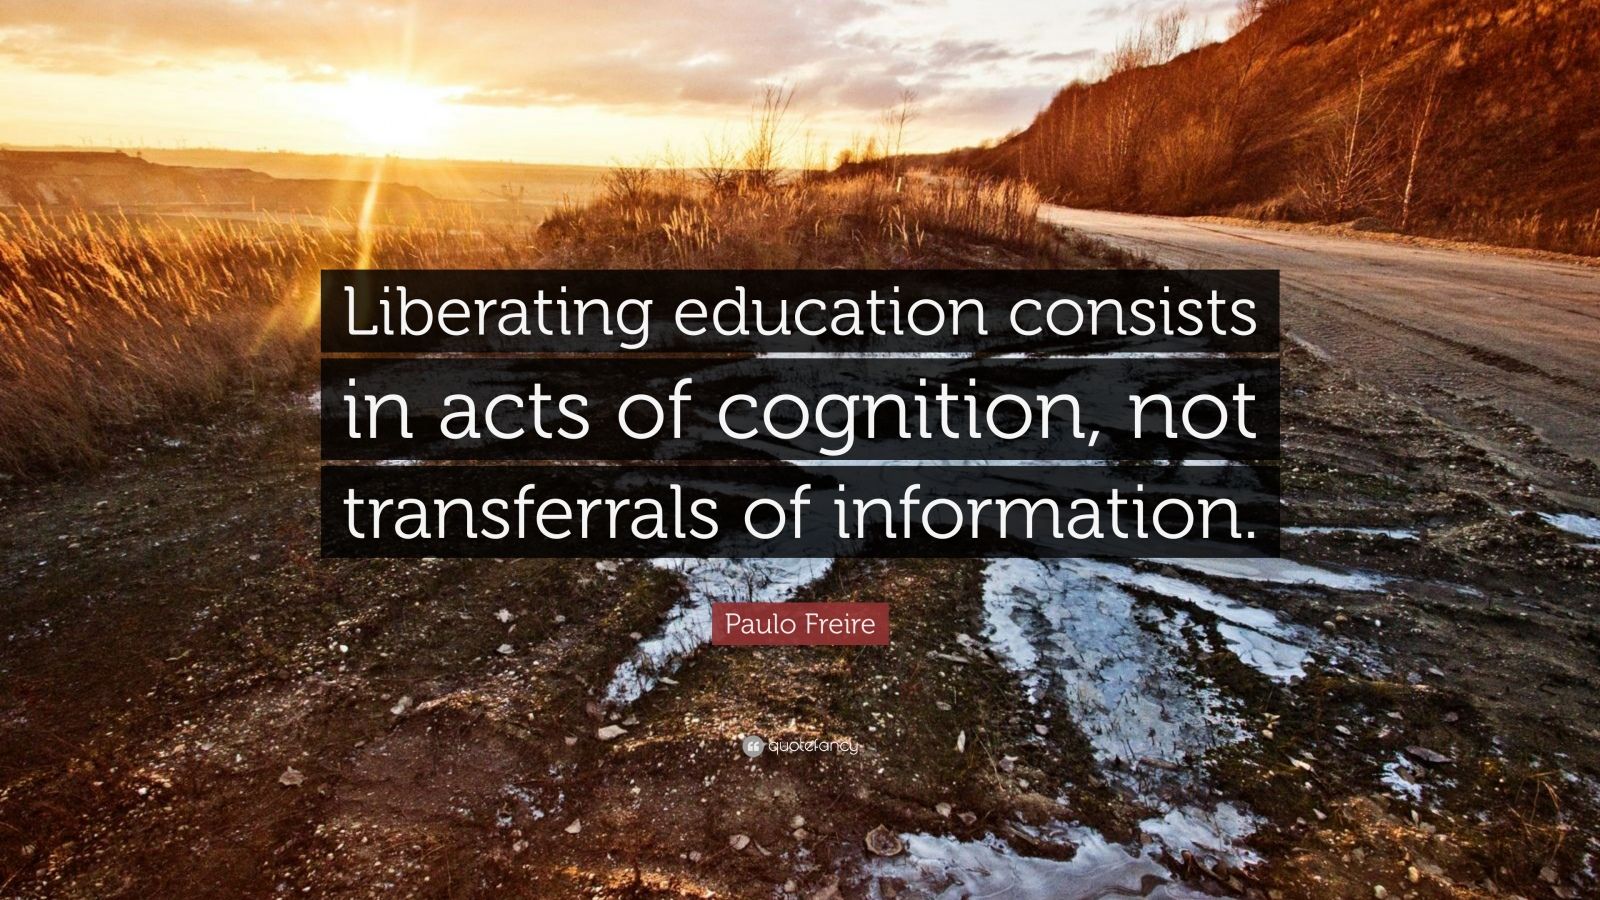 Paulo Freire Quote: “Liberating education consists in acts of cognition